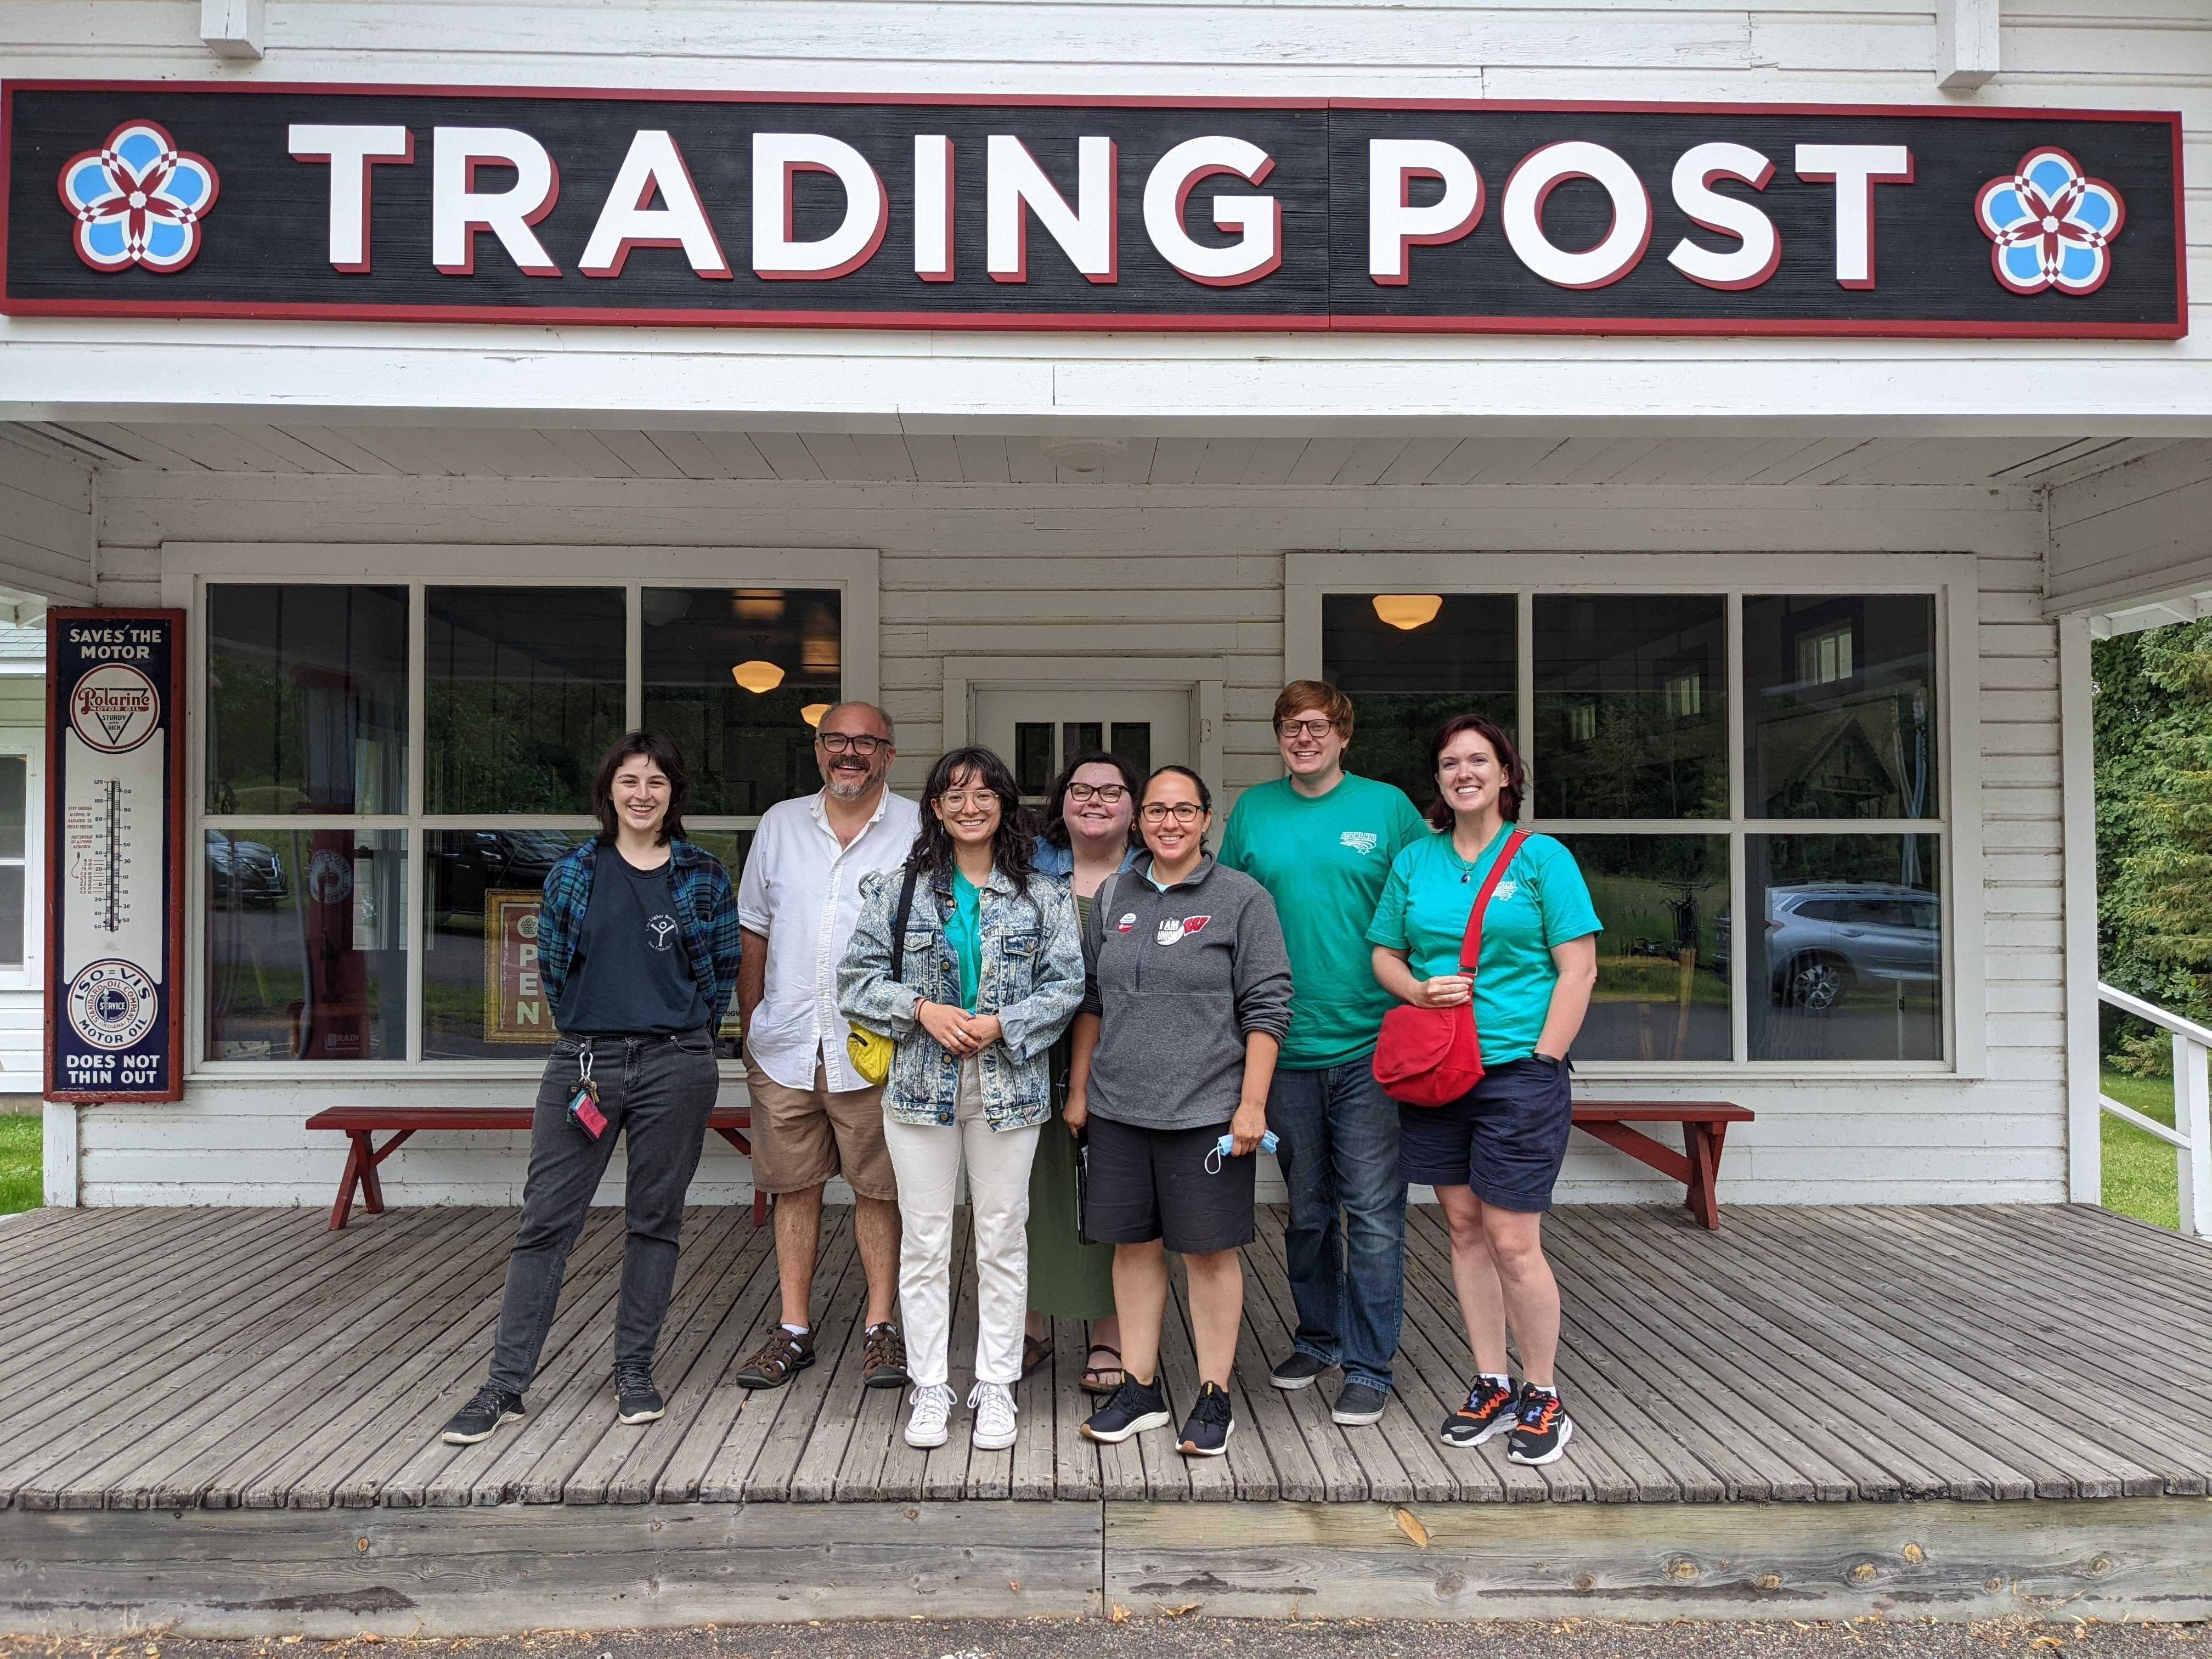 Organizing committee members at the Mille Lacs Indian Museum and Trading Post